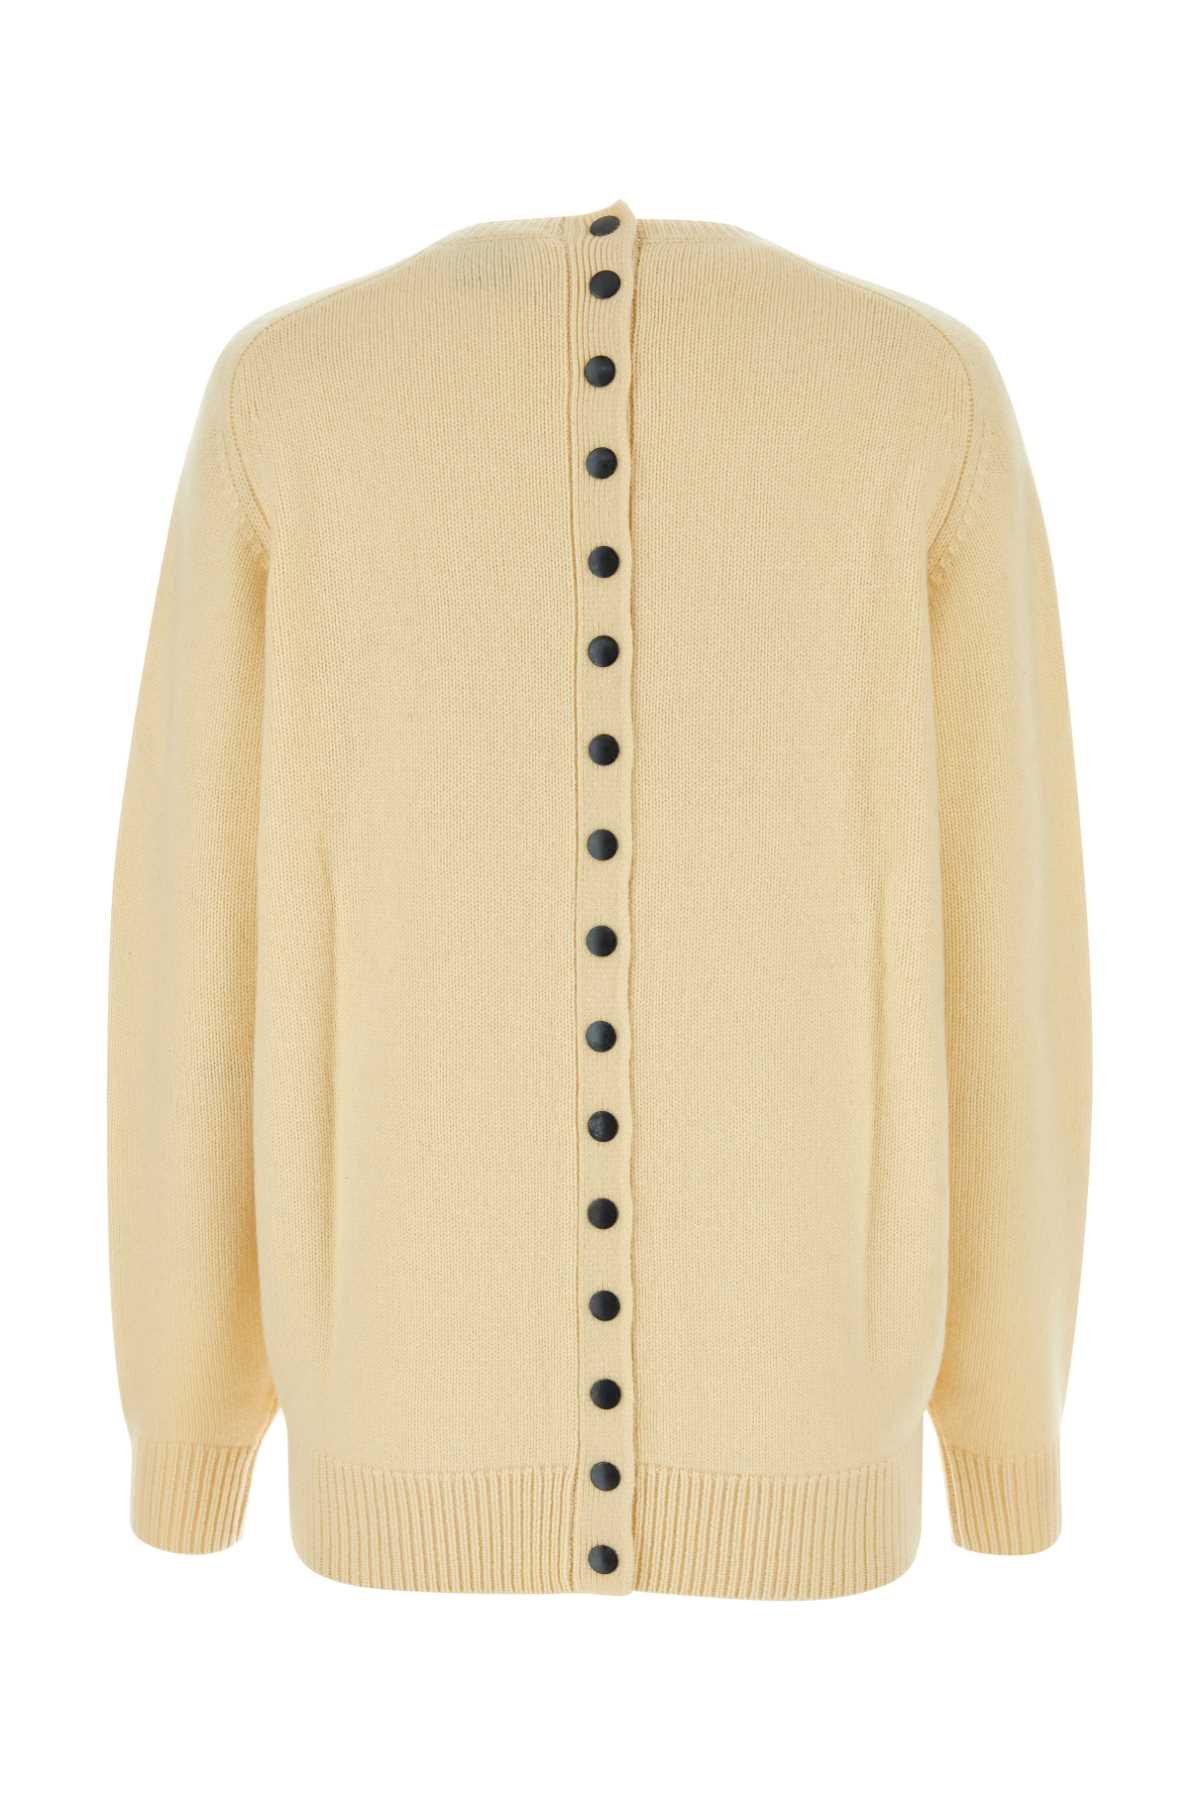 Isabel Marant Yellow Wool Blend Lison Oversize Sweater In Pollen